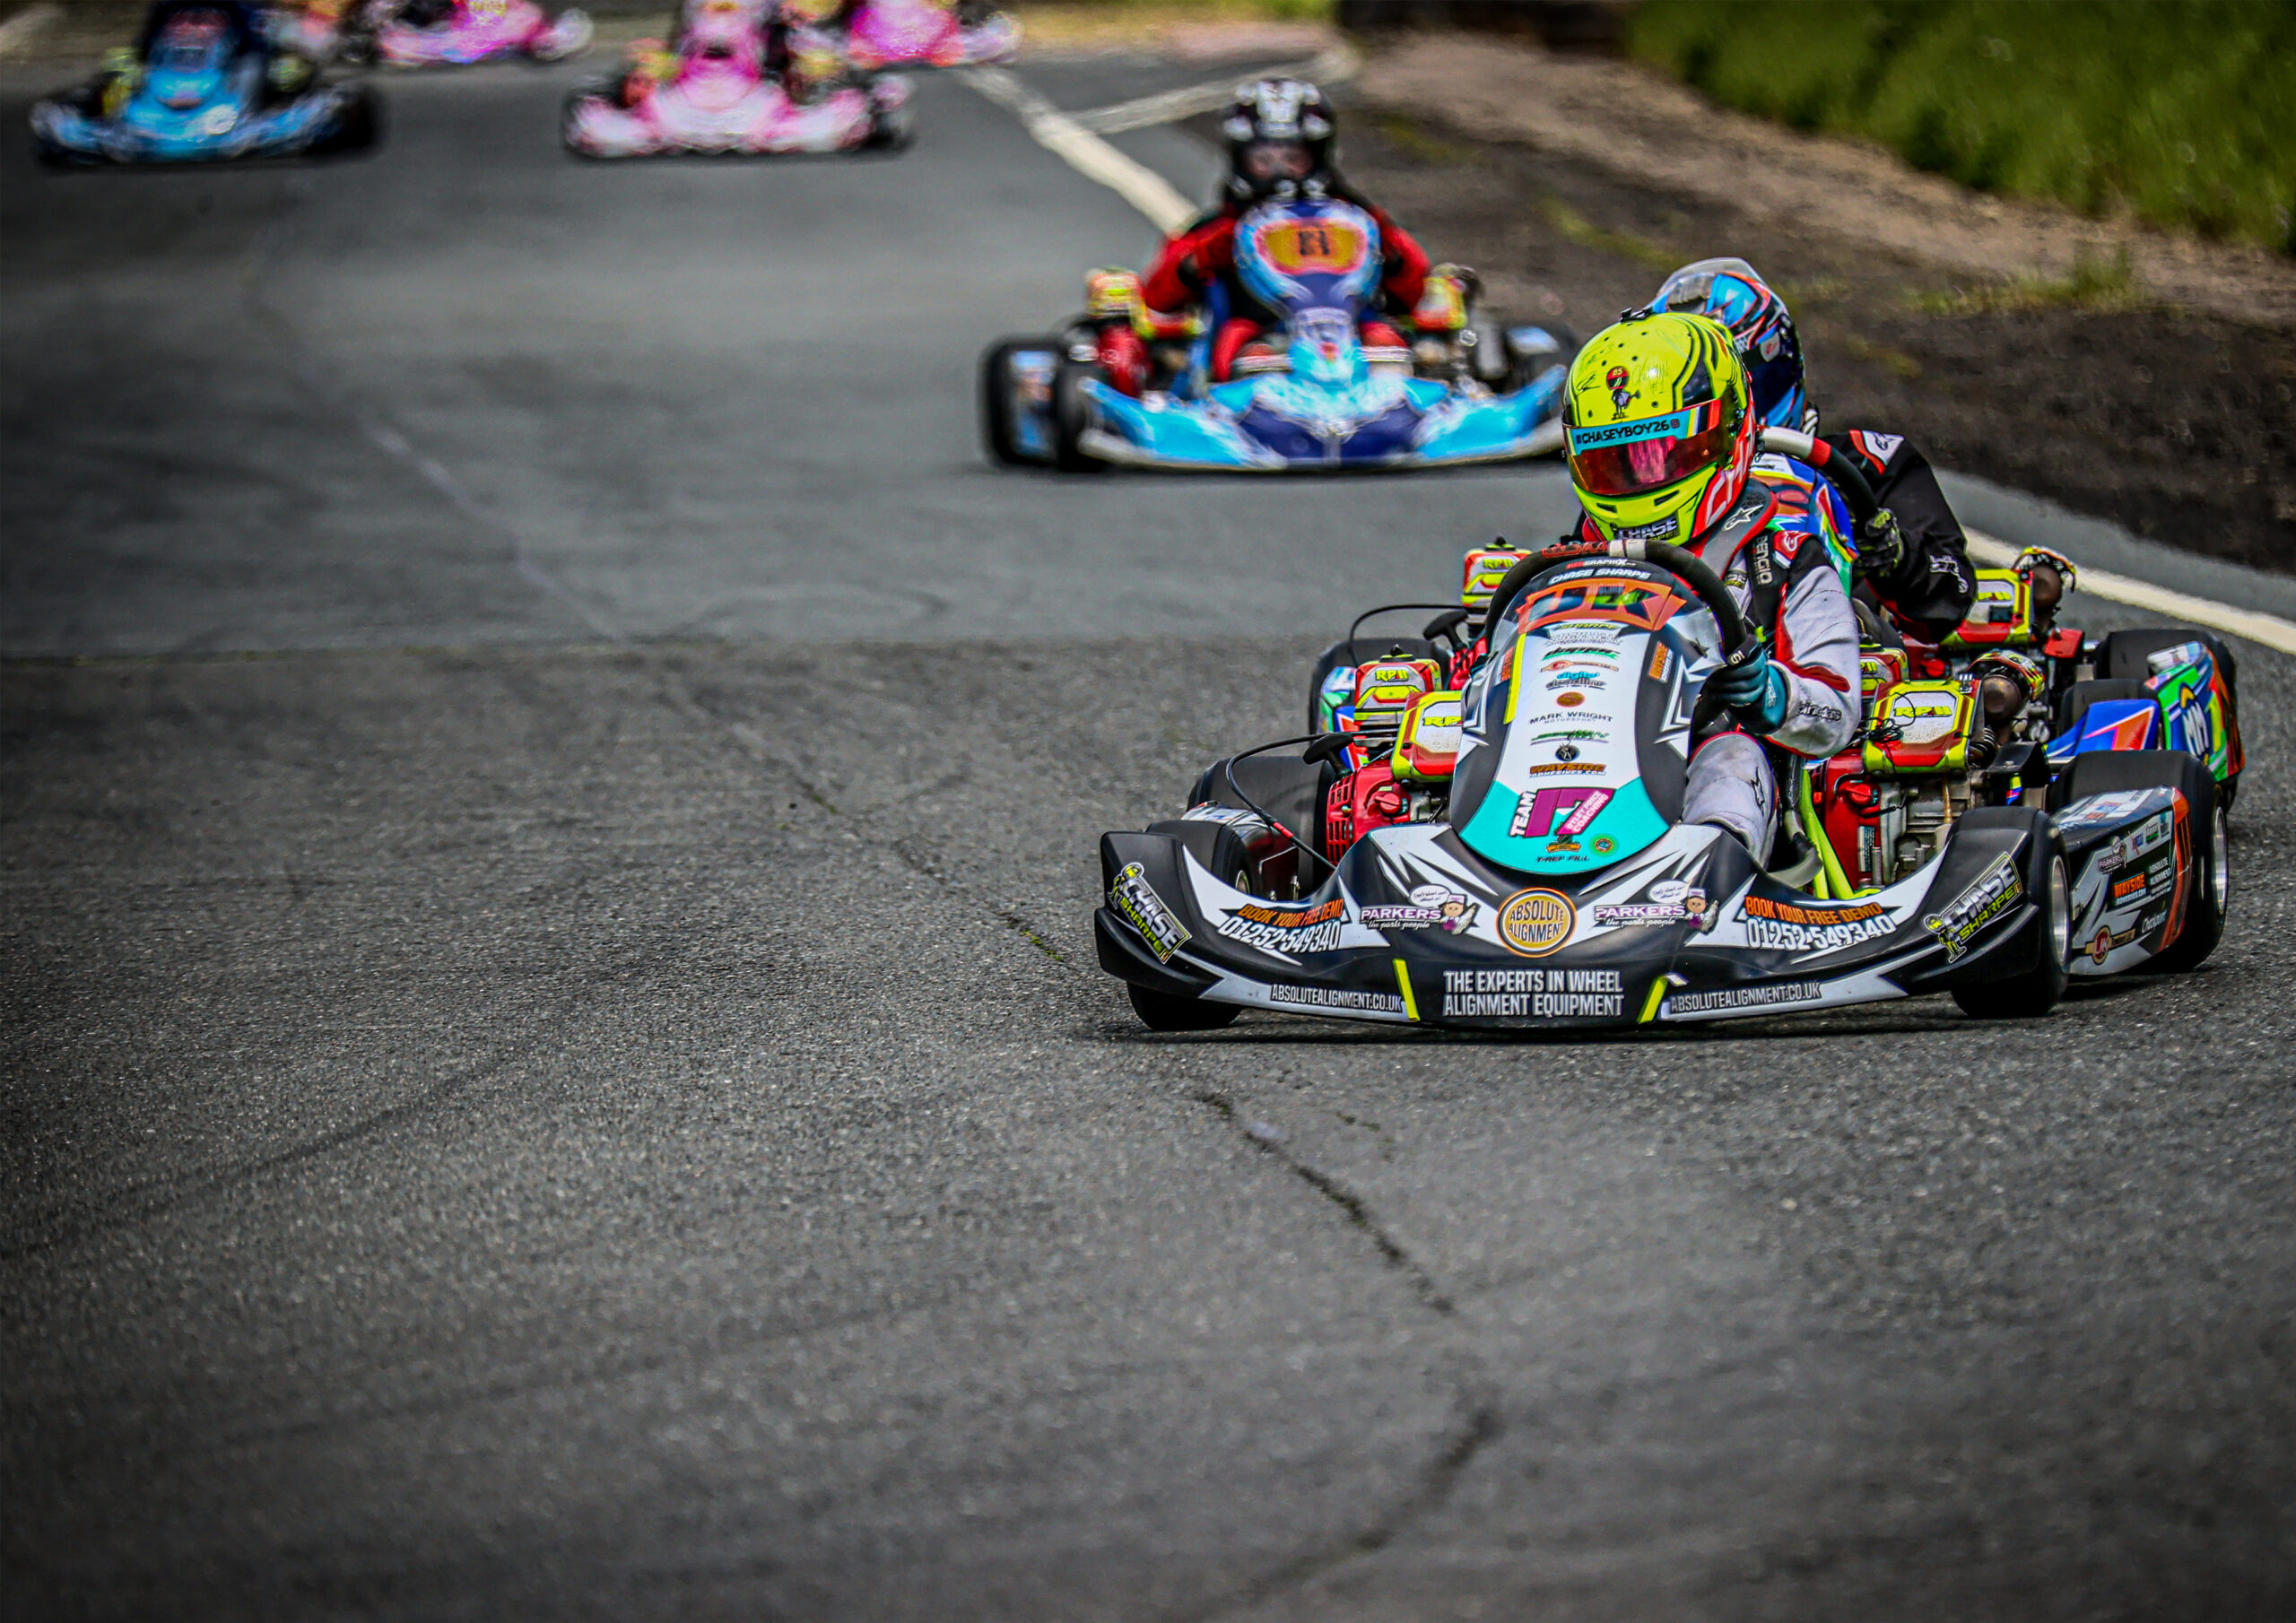 EBC-Equipped Chase Sharpe Excels in Shenington Round of Junior Pro Kart Series